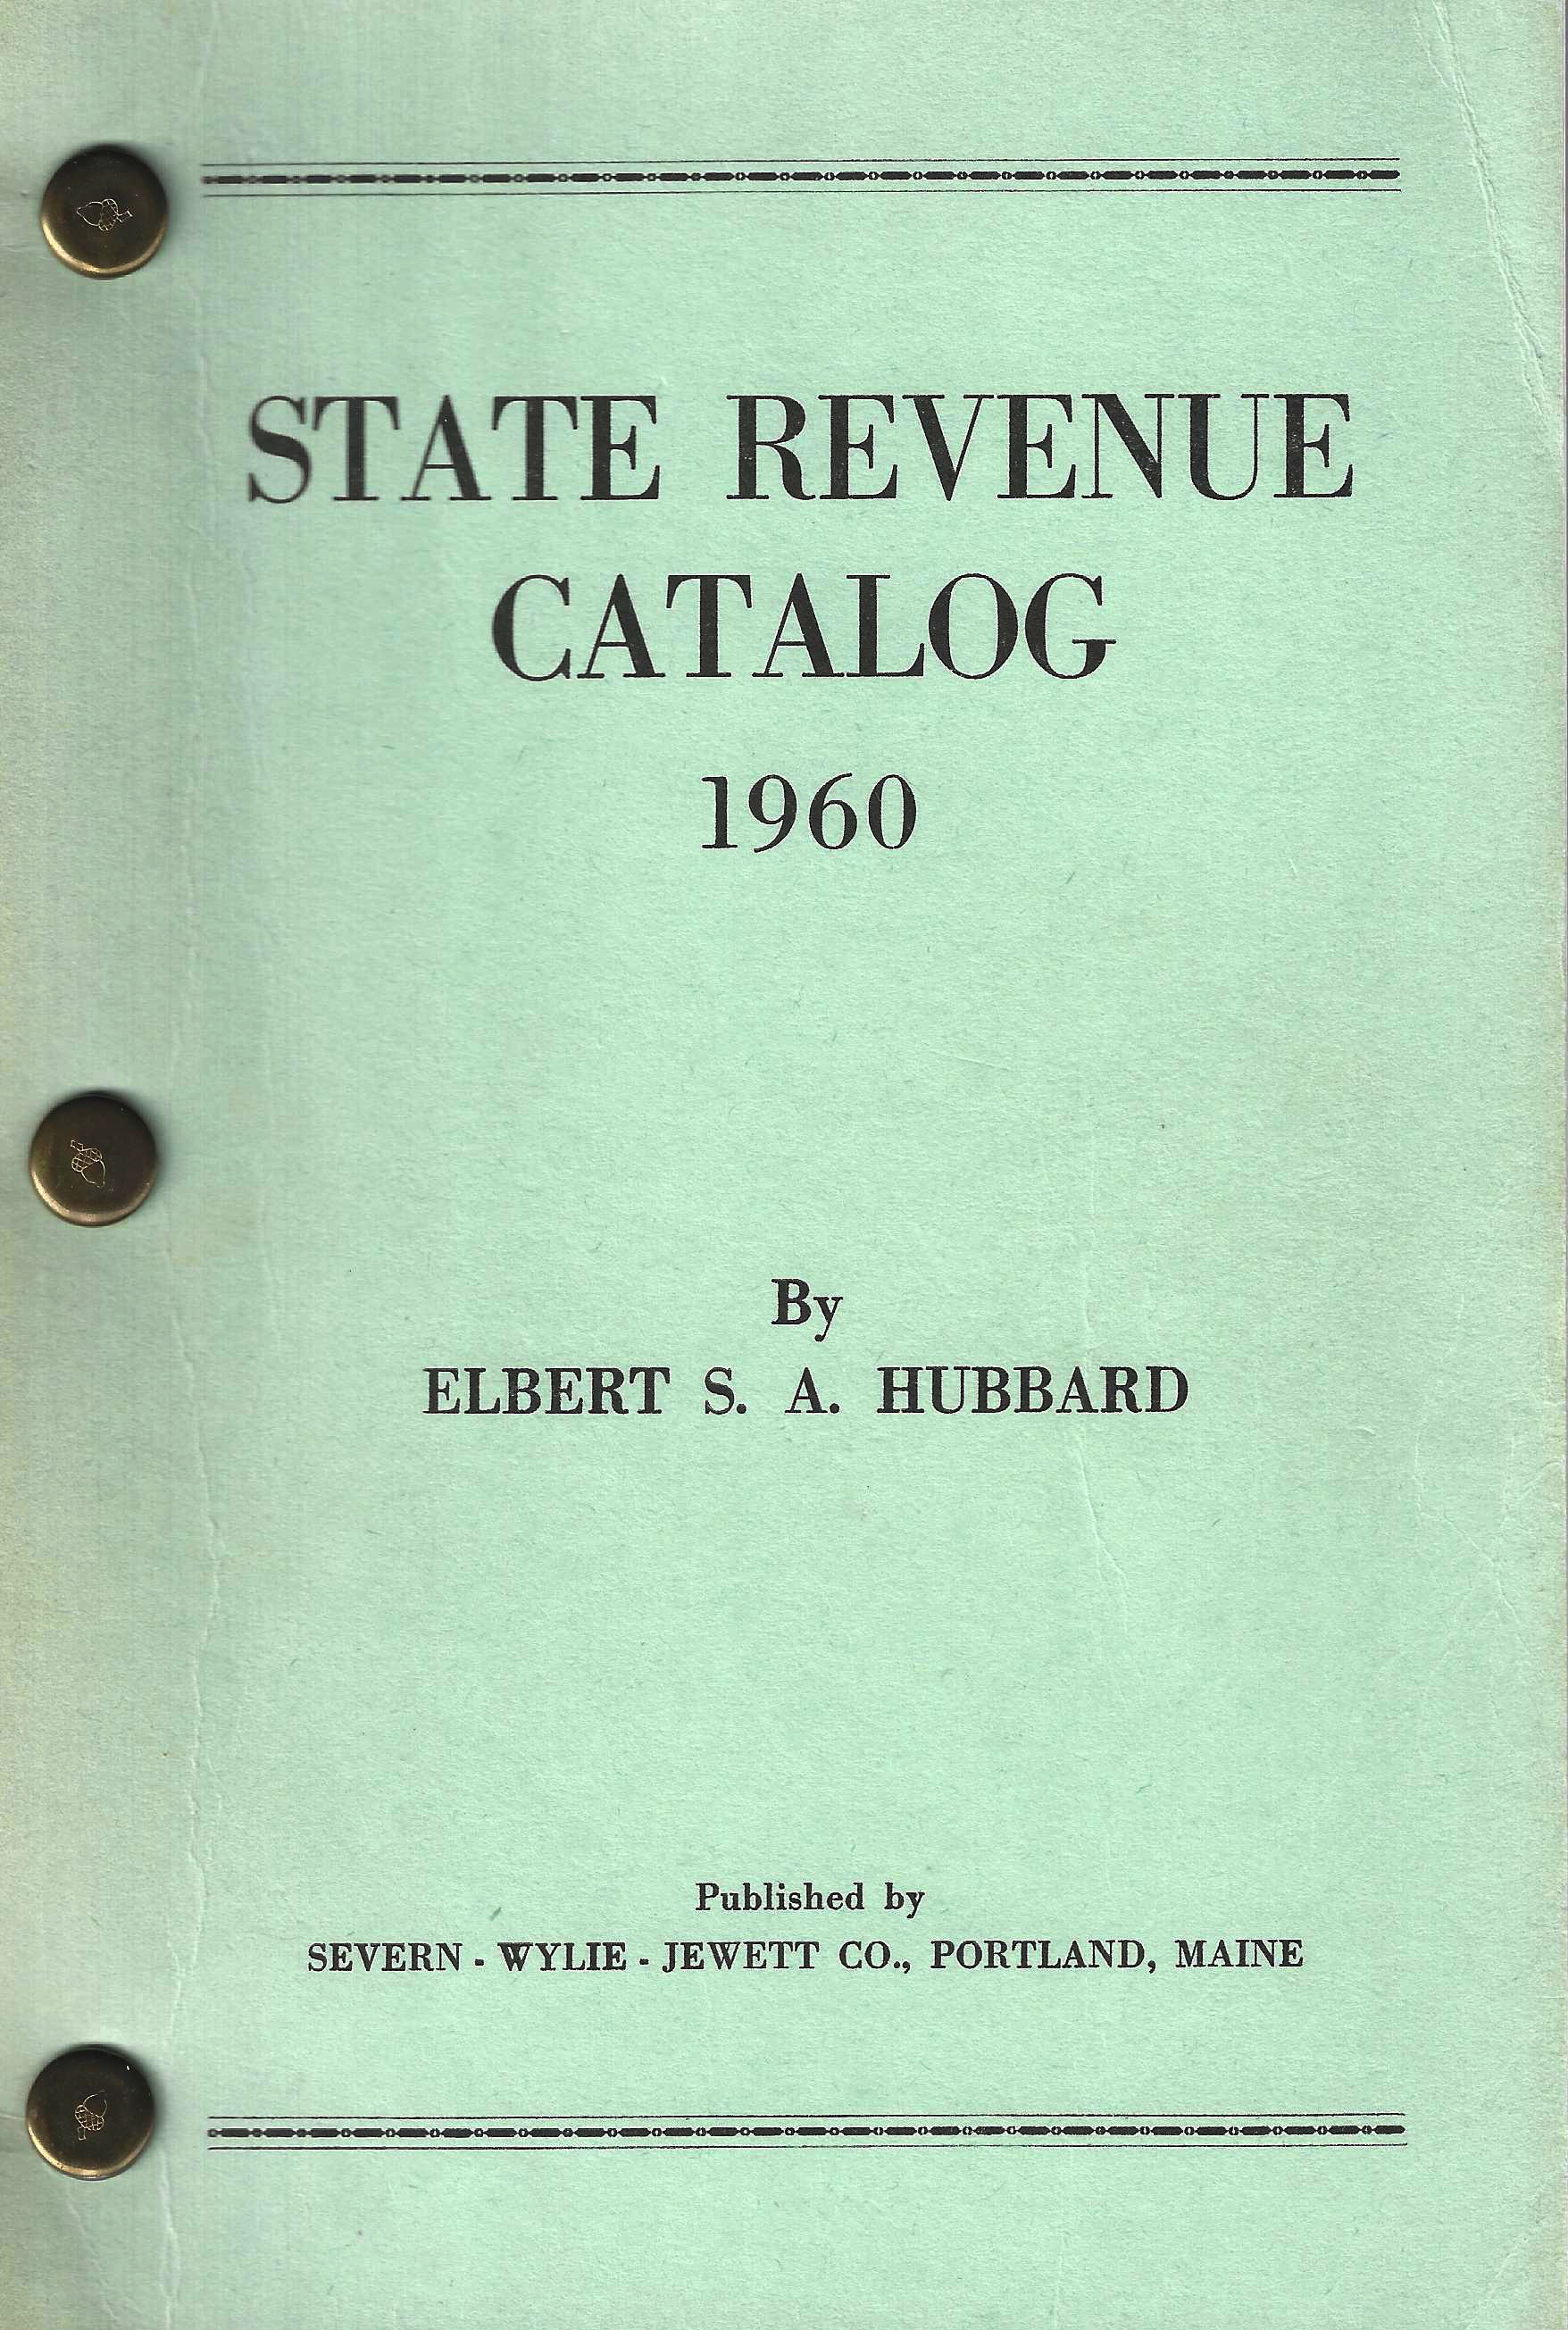 CATALOG - State Revenue Catalog, 1960, by Elbert S. A. Hubbard, out of print, in like new condition, Wrisley paid $75.00 for this catalog in 2010